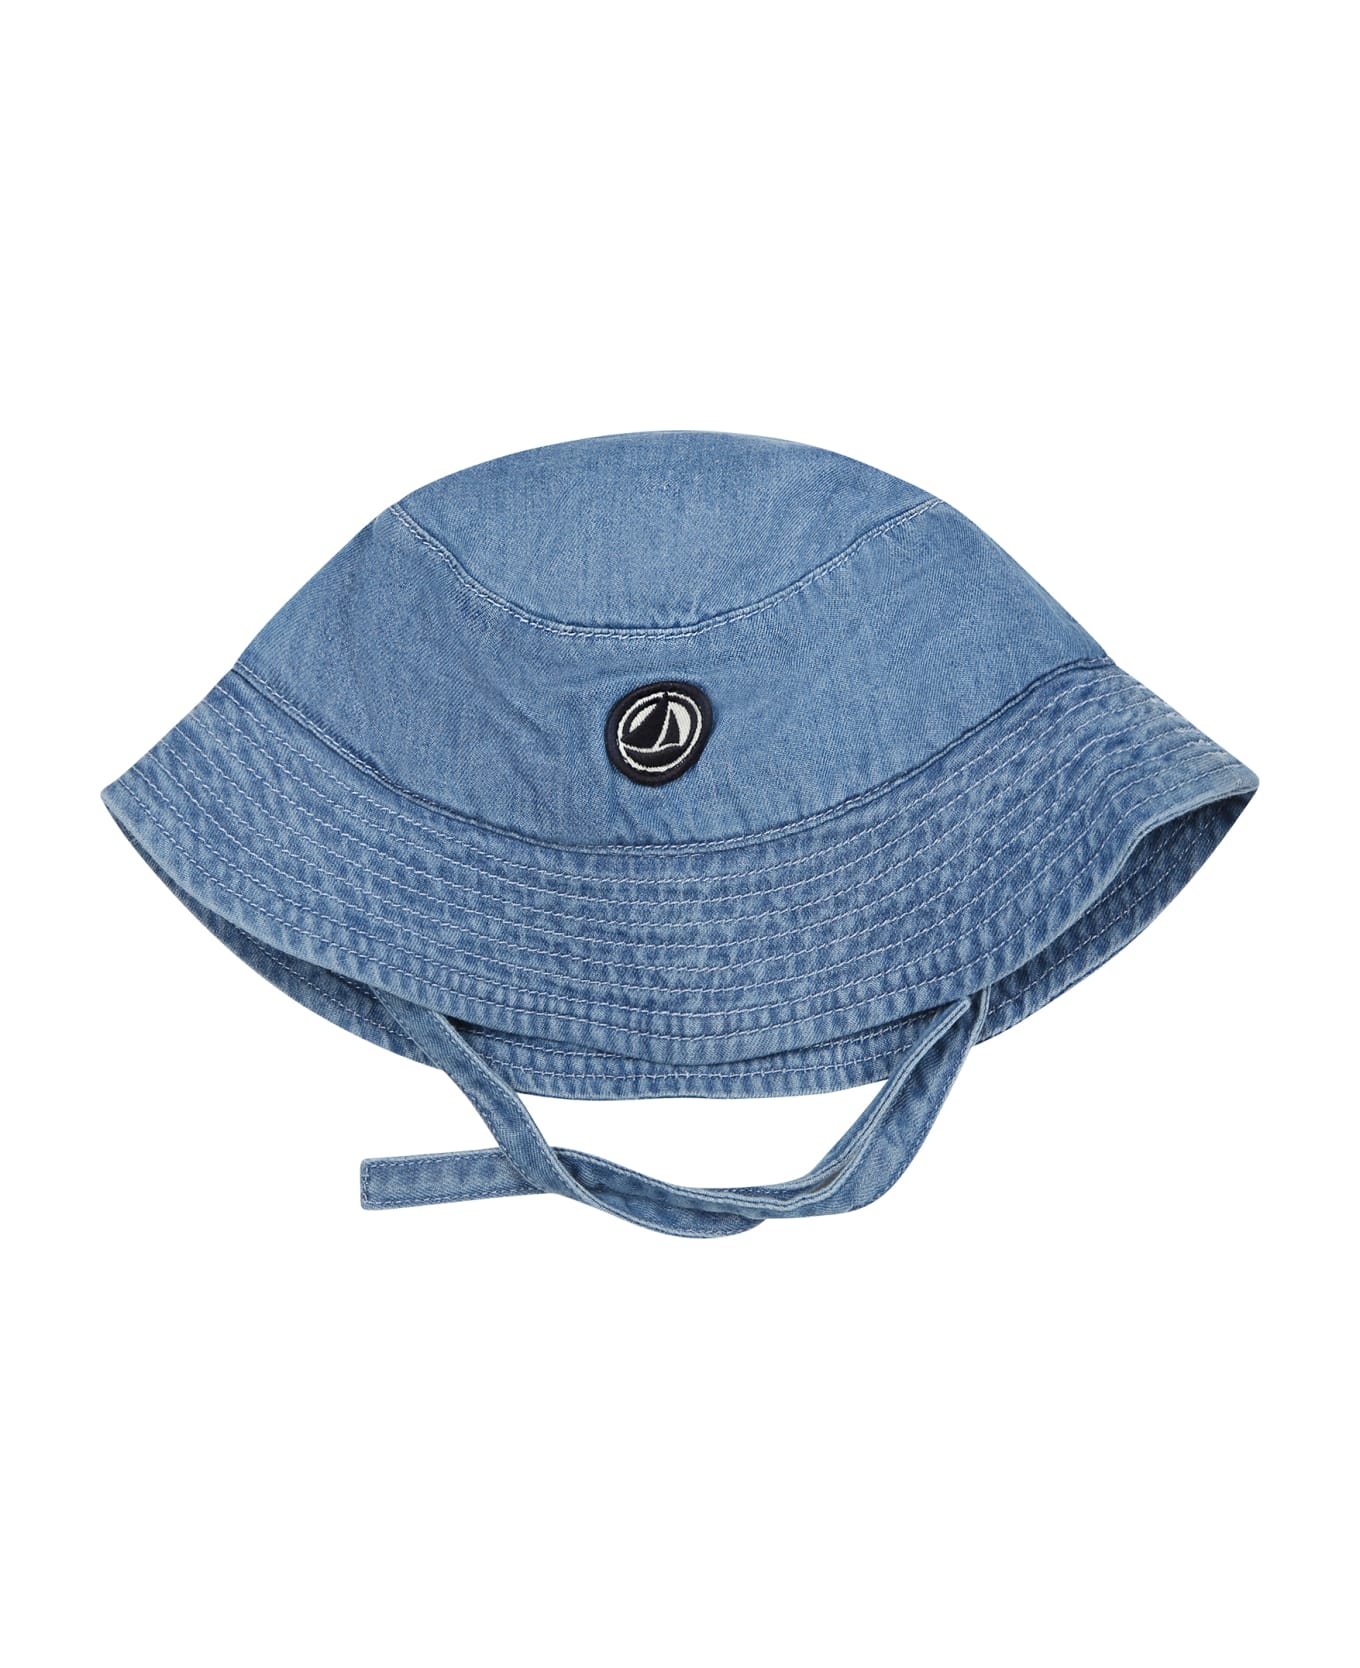 Petit Bateau Blue Cloche For Baby Girl With Logo - Denim アクセサリー＆ギフト